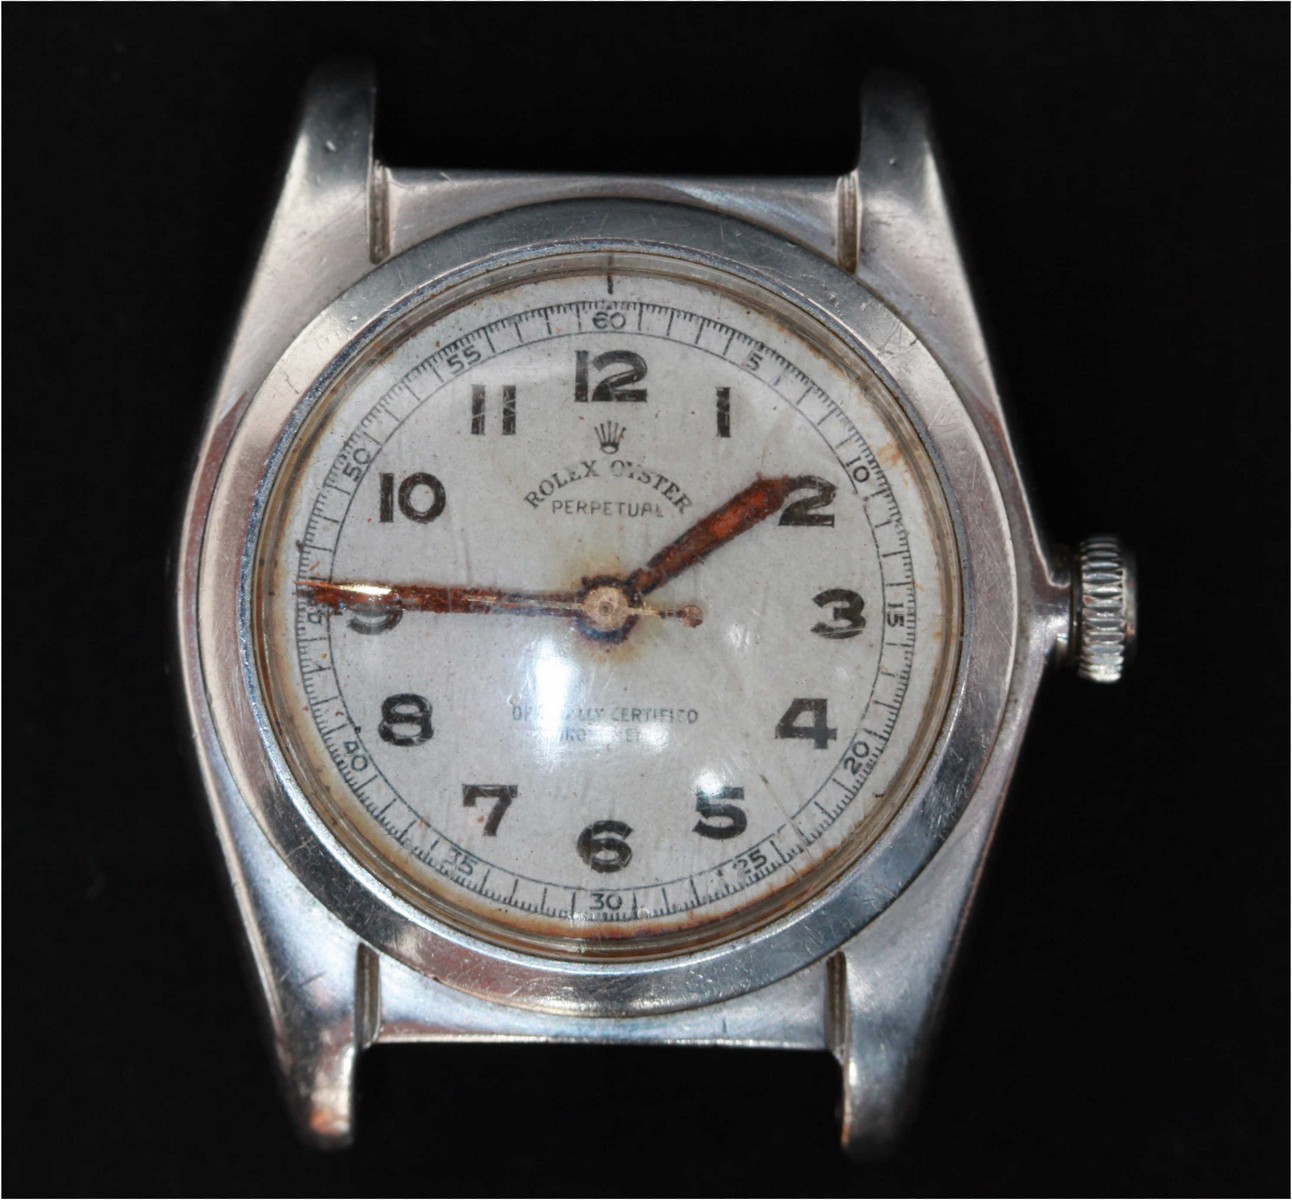 A 1947 Rolex Oyster Perpetual stainless steel automatic bubbleback wrist watch, reference N62069,